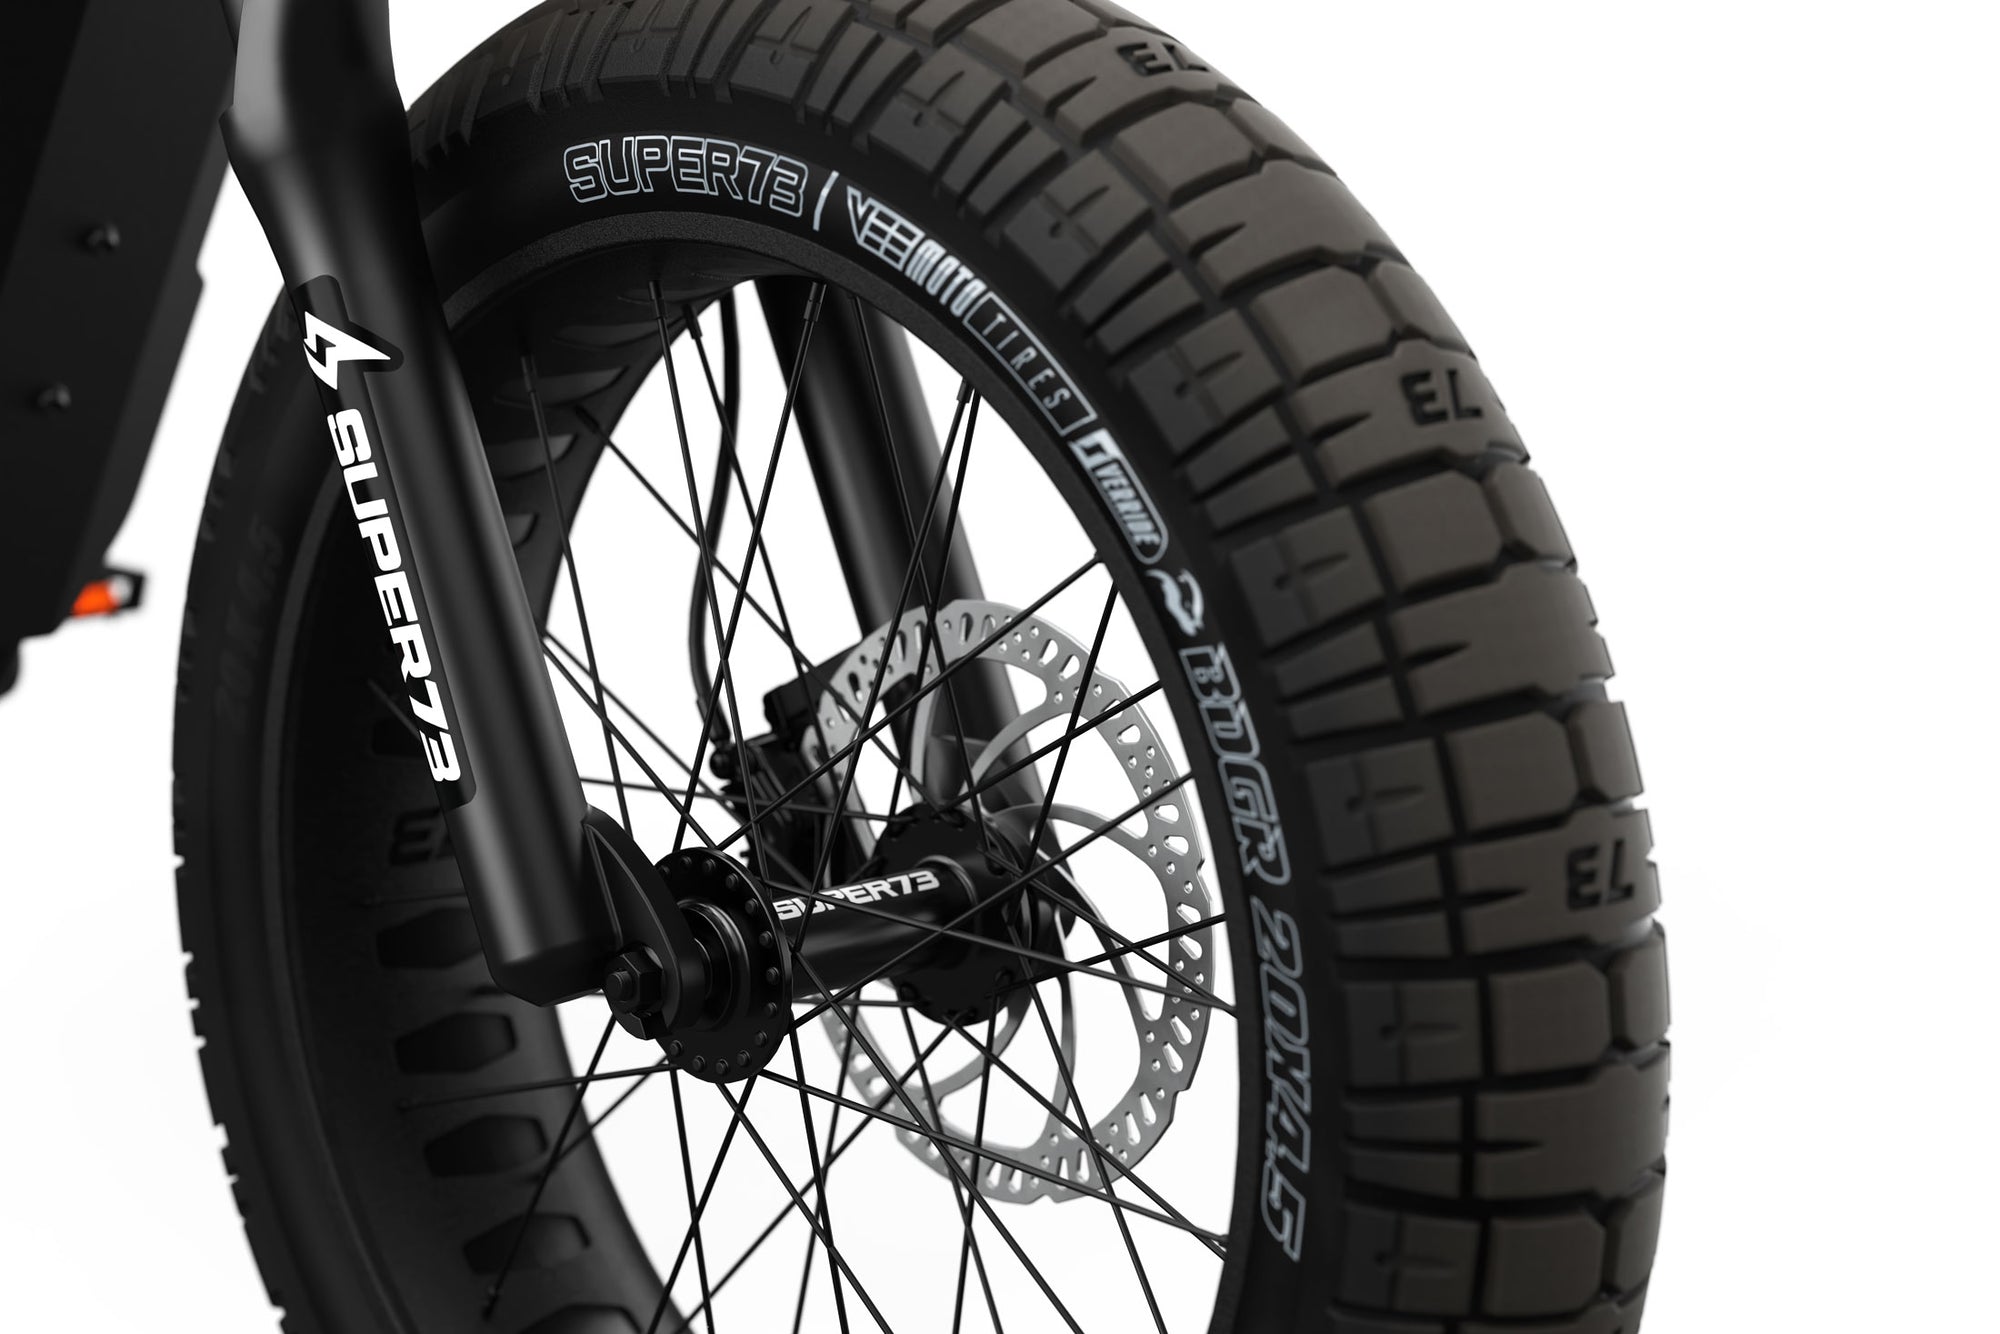 Detail shot of the SUPER73-S2 front tire.